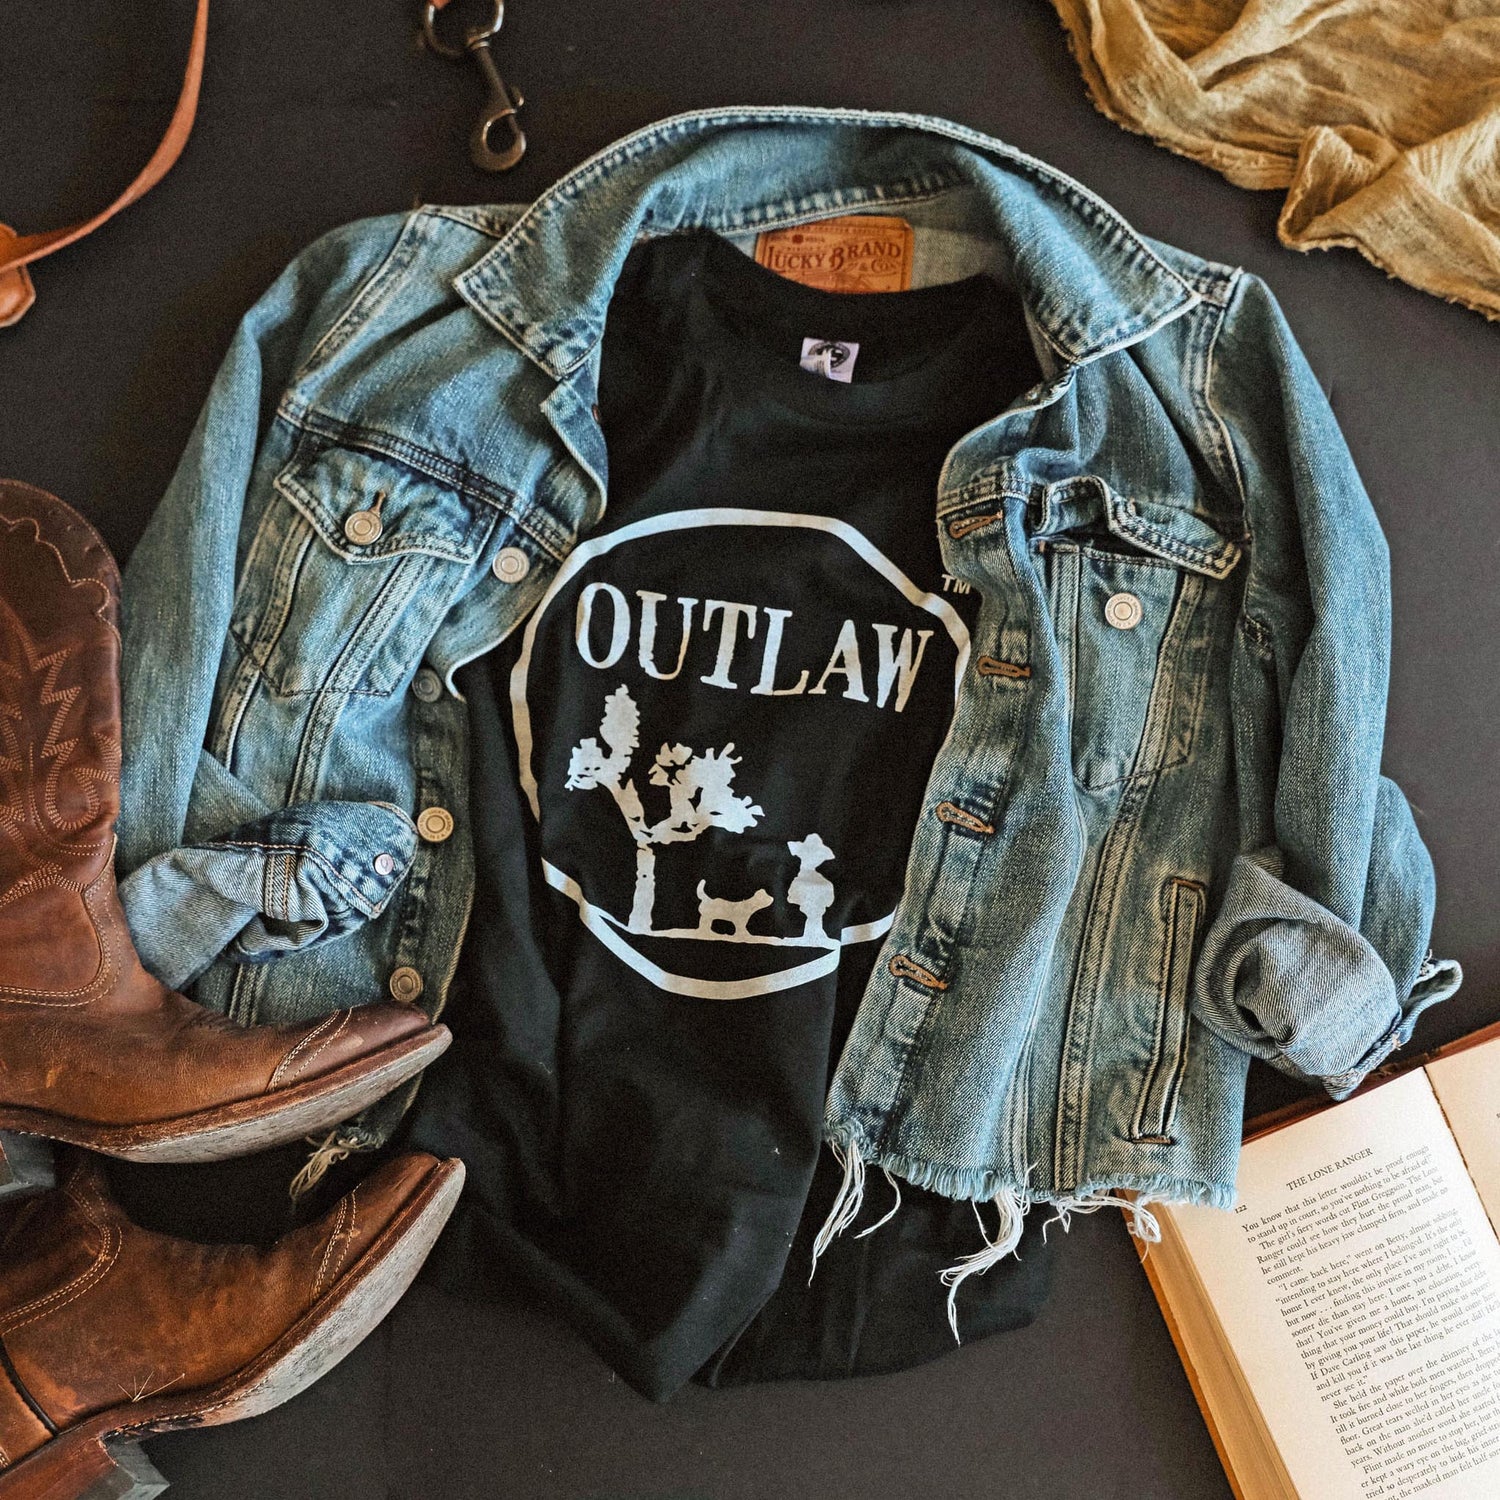 Outlaw Gear: Outfit Yourself